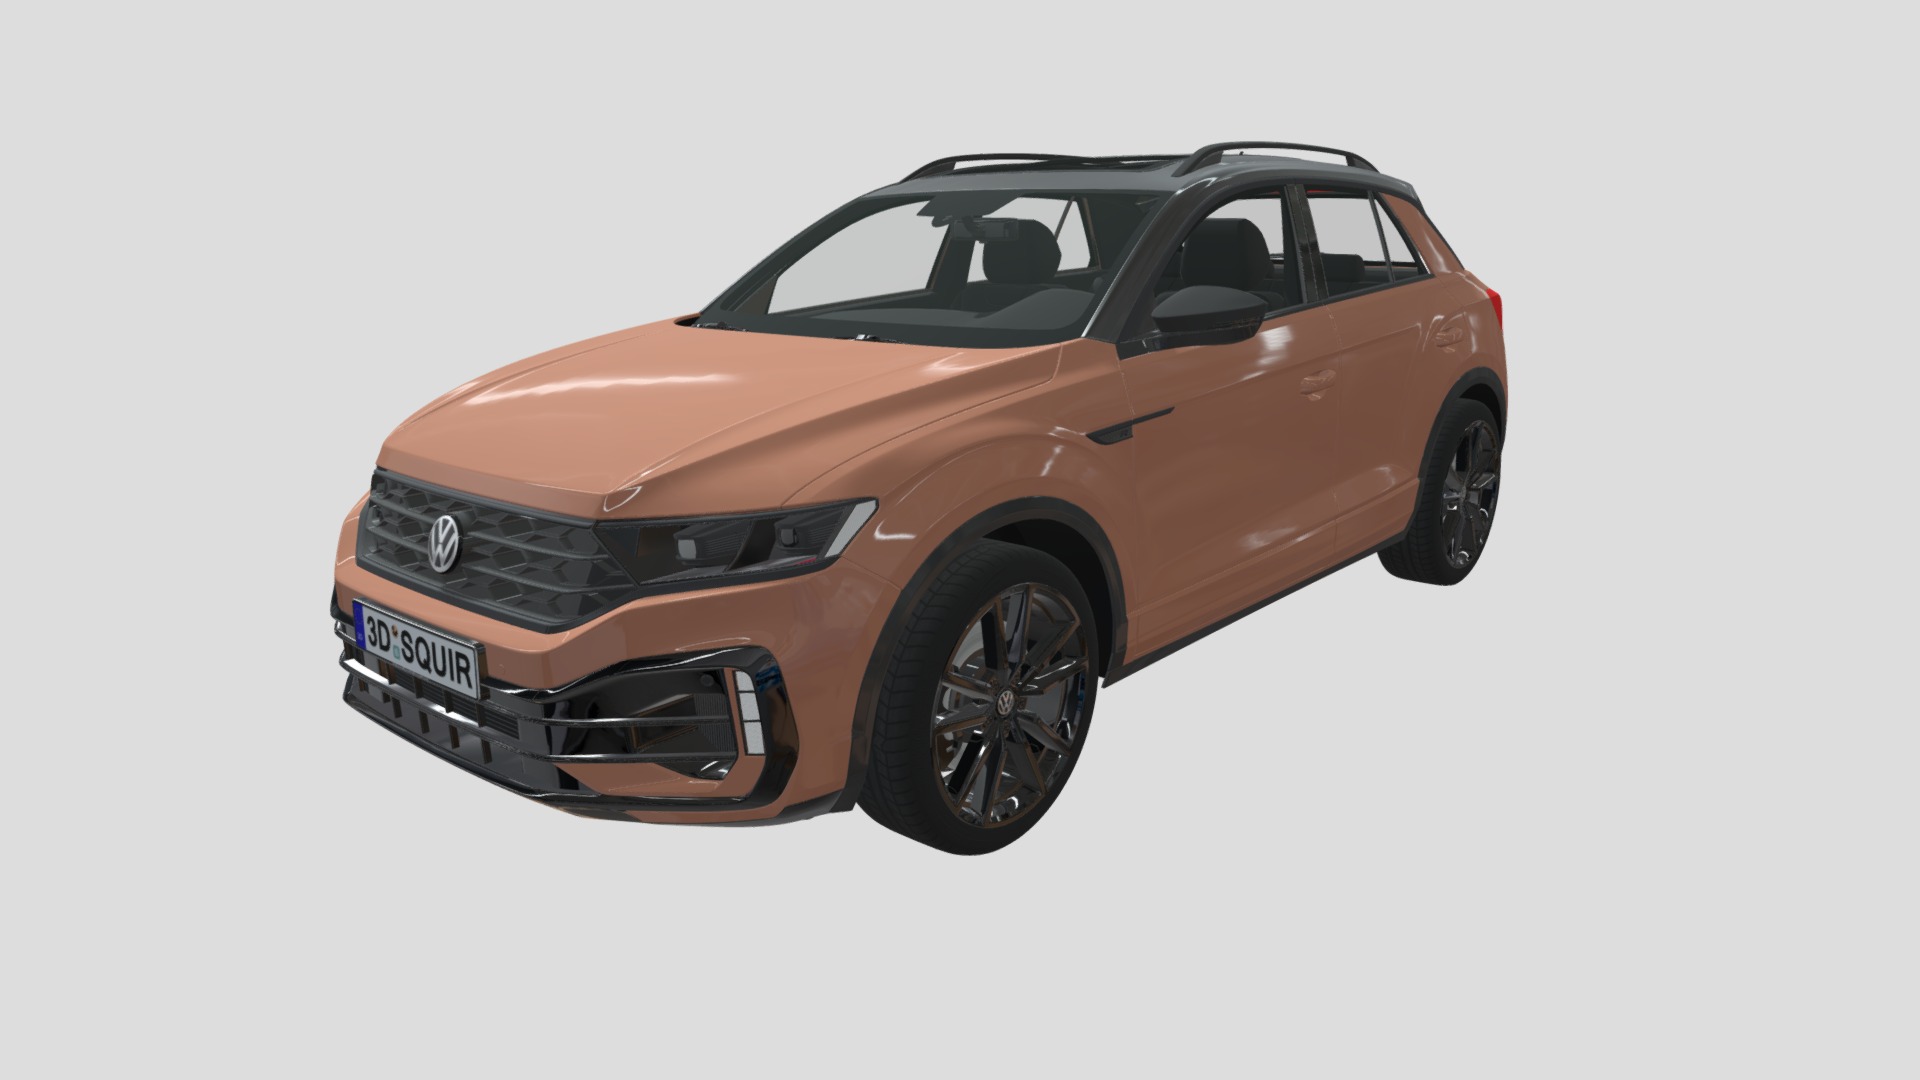 3D model Volkswagen T-Roc R 2020 - This is a 3D model of the Volkswagen T-Roc R 2020. The 3D model is about a car parked on a white background.